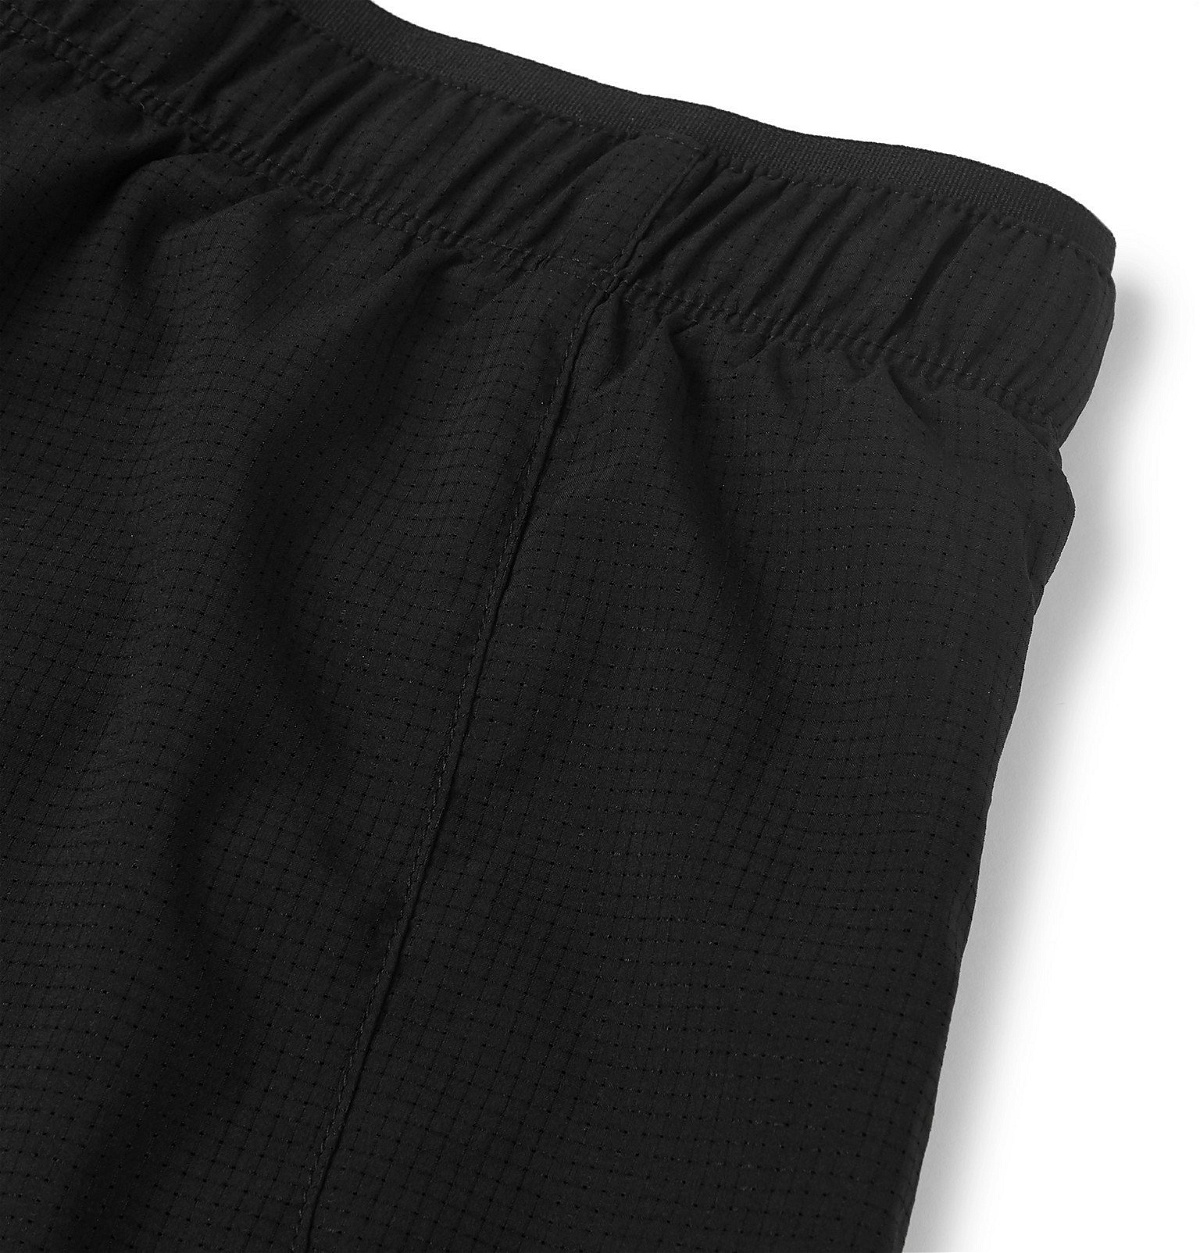 Reigning Champ - Performance Perforated Shell Shorts - Black Reigning Champ